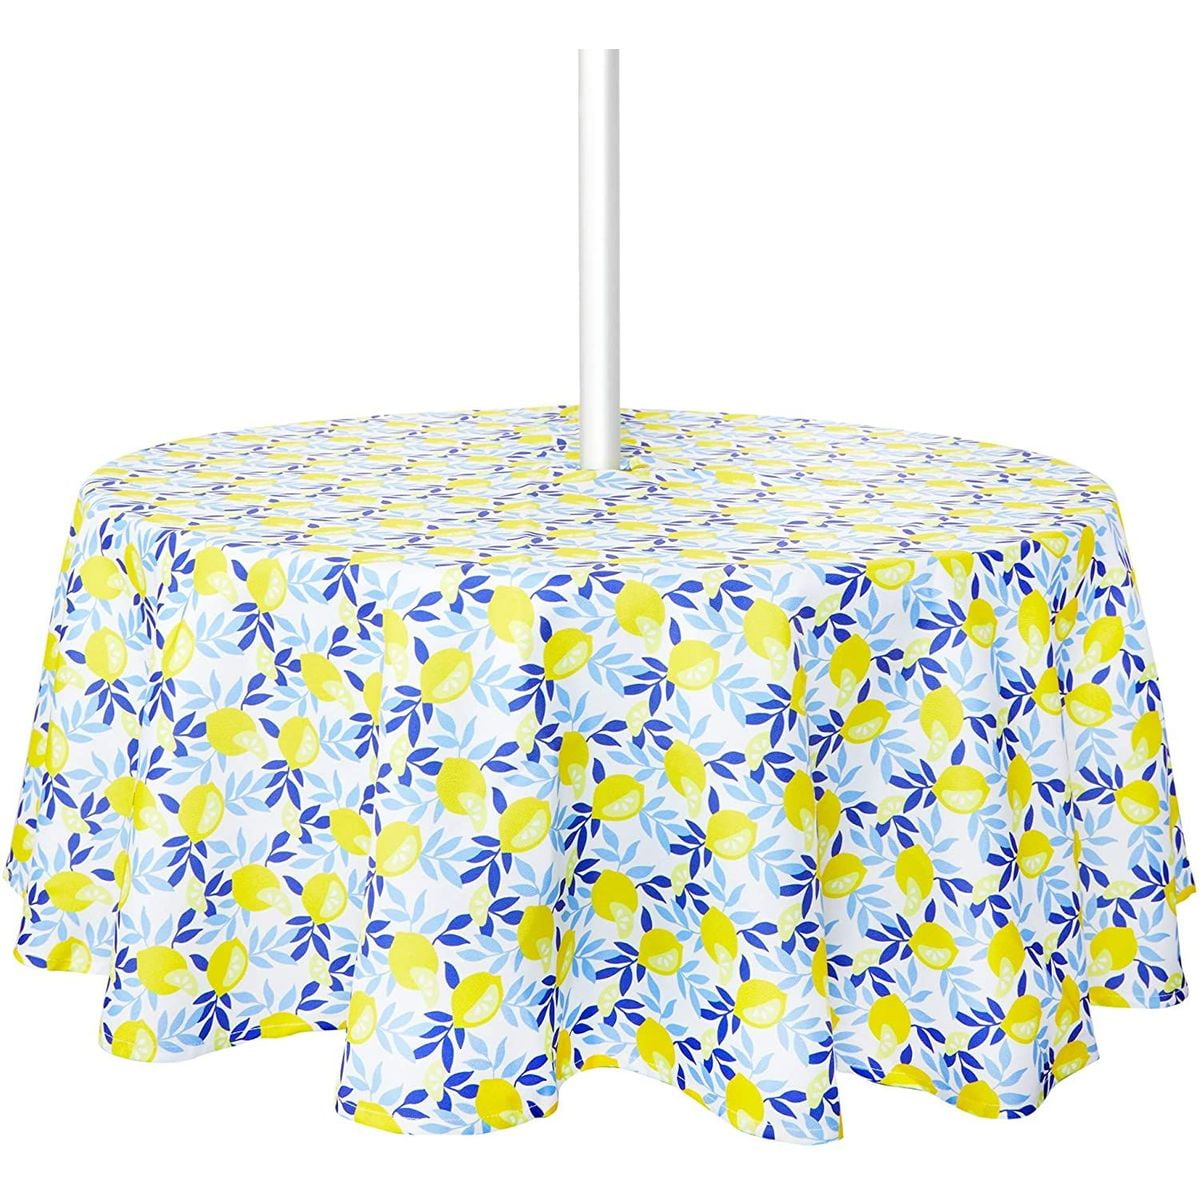 Lemon Plastic Tablecloth Table Cover, Round Picnic Table Cover With Umbrella Hole